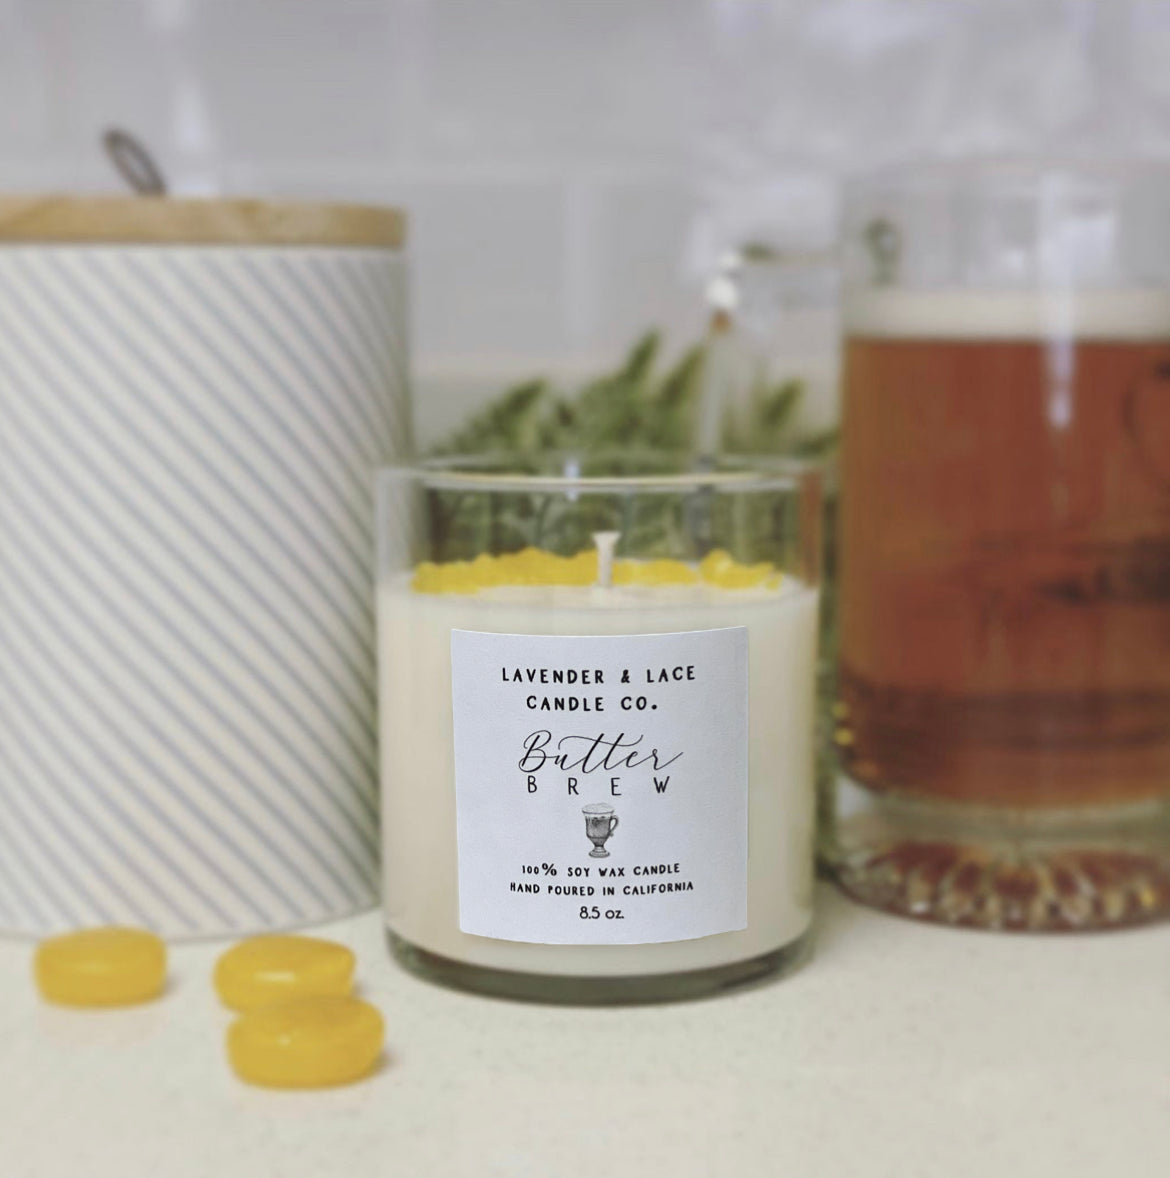 Butterbrew Candle - Lavender and Lace Candles